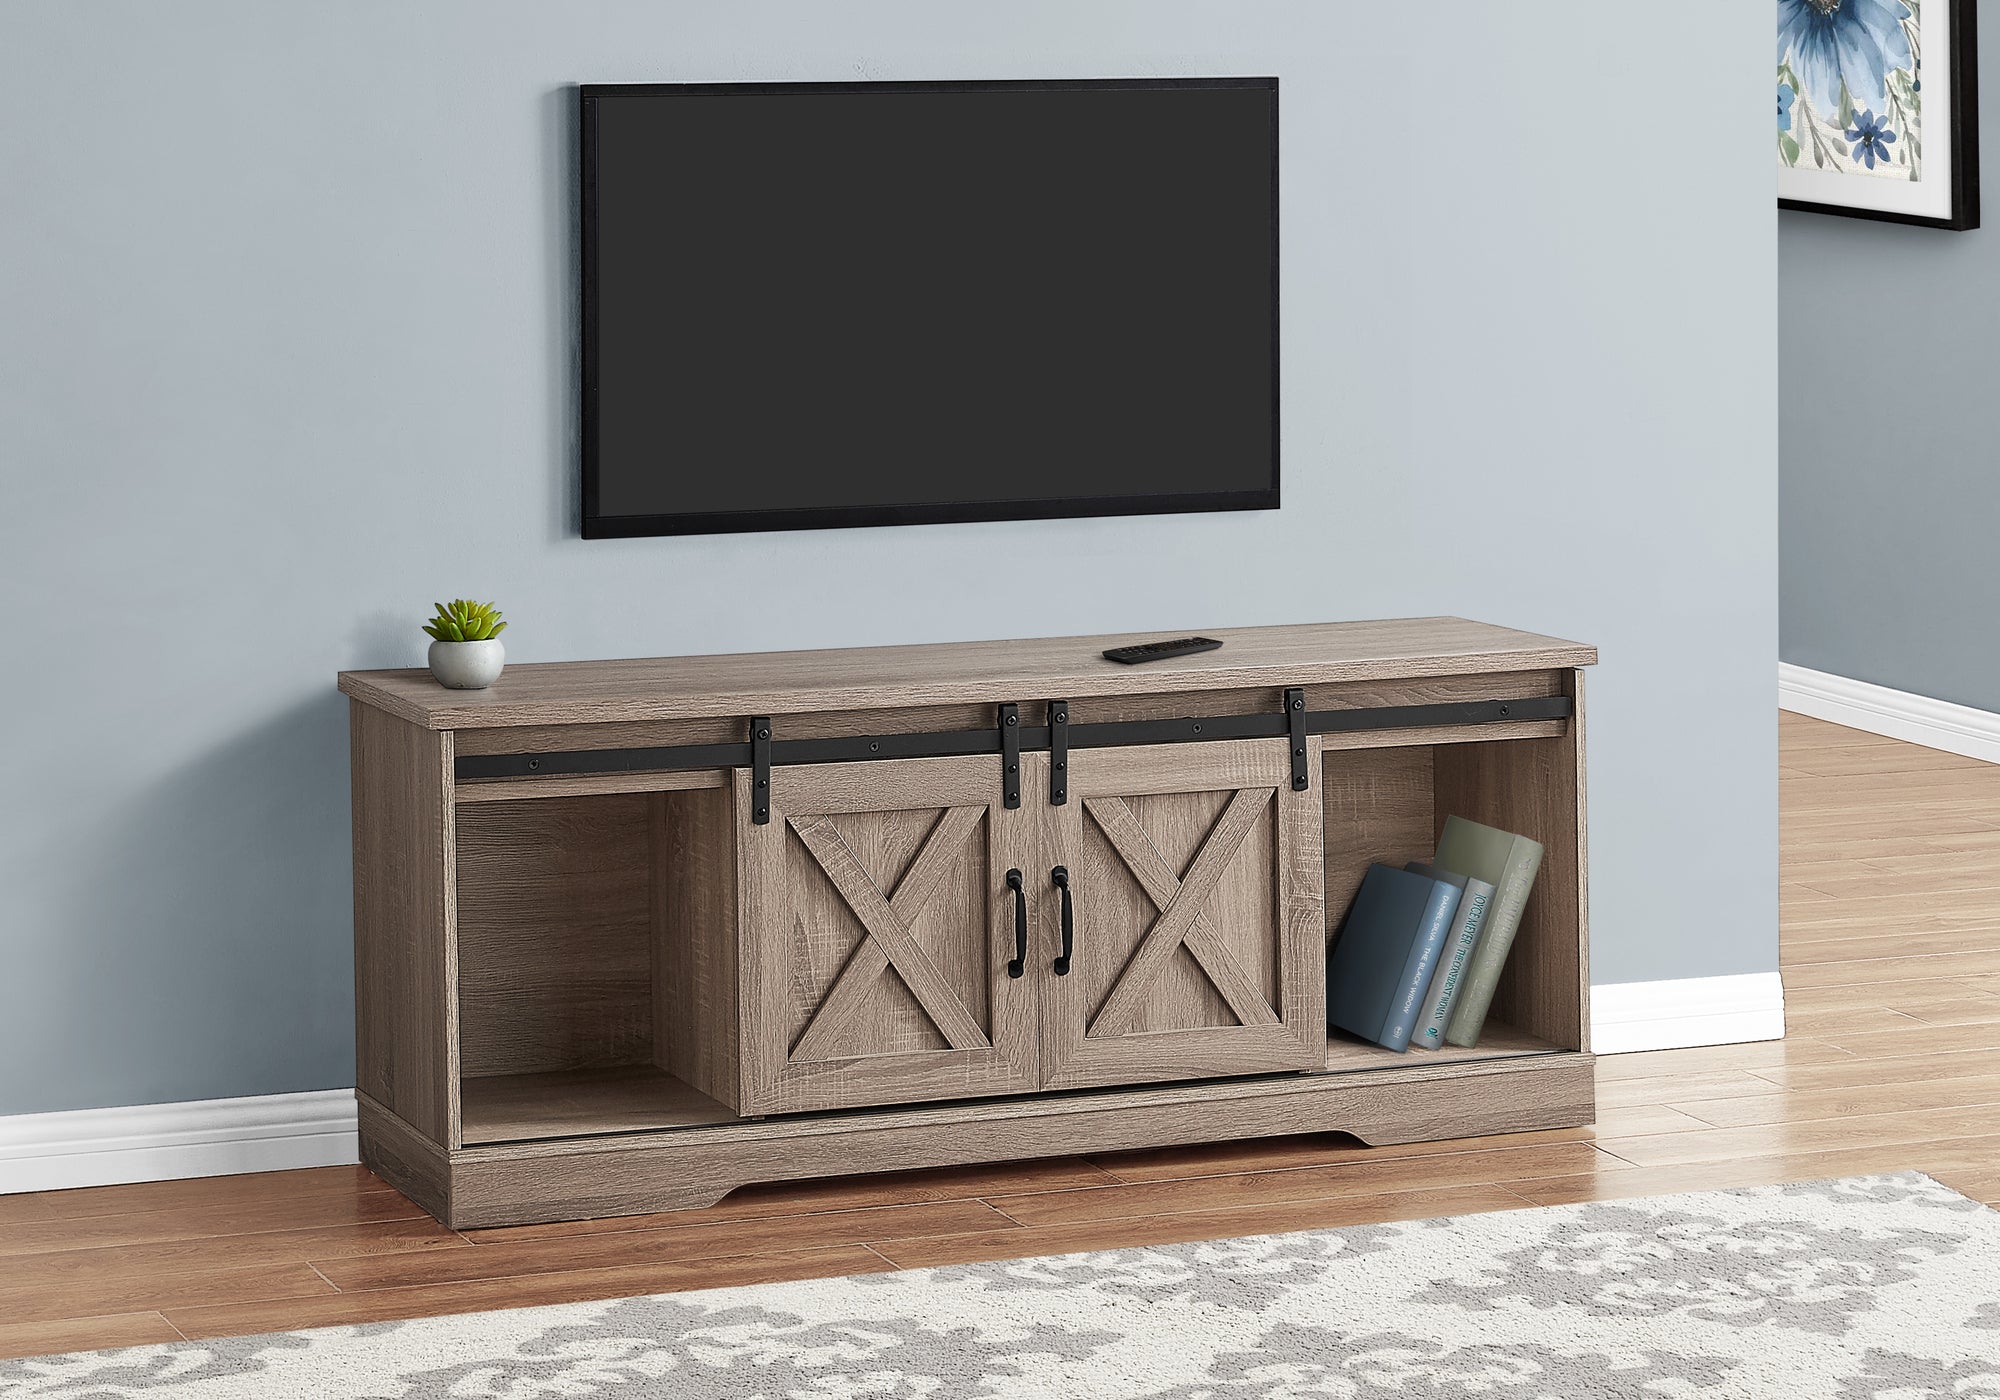 I 2746 - TV STAND - 60"L / DARK TAUPE WITH 2 SLIDING DOORS BY MONARCH SPECIALTIES INC